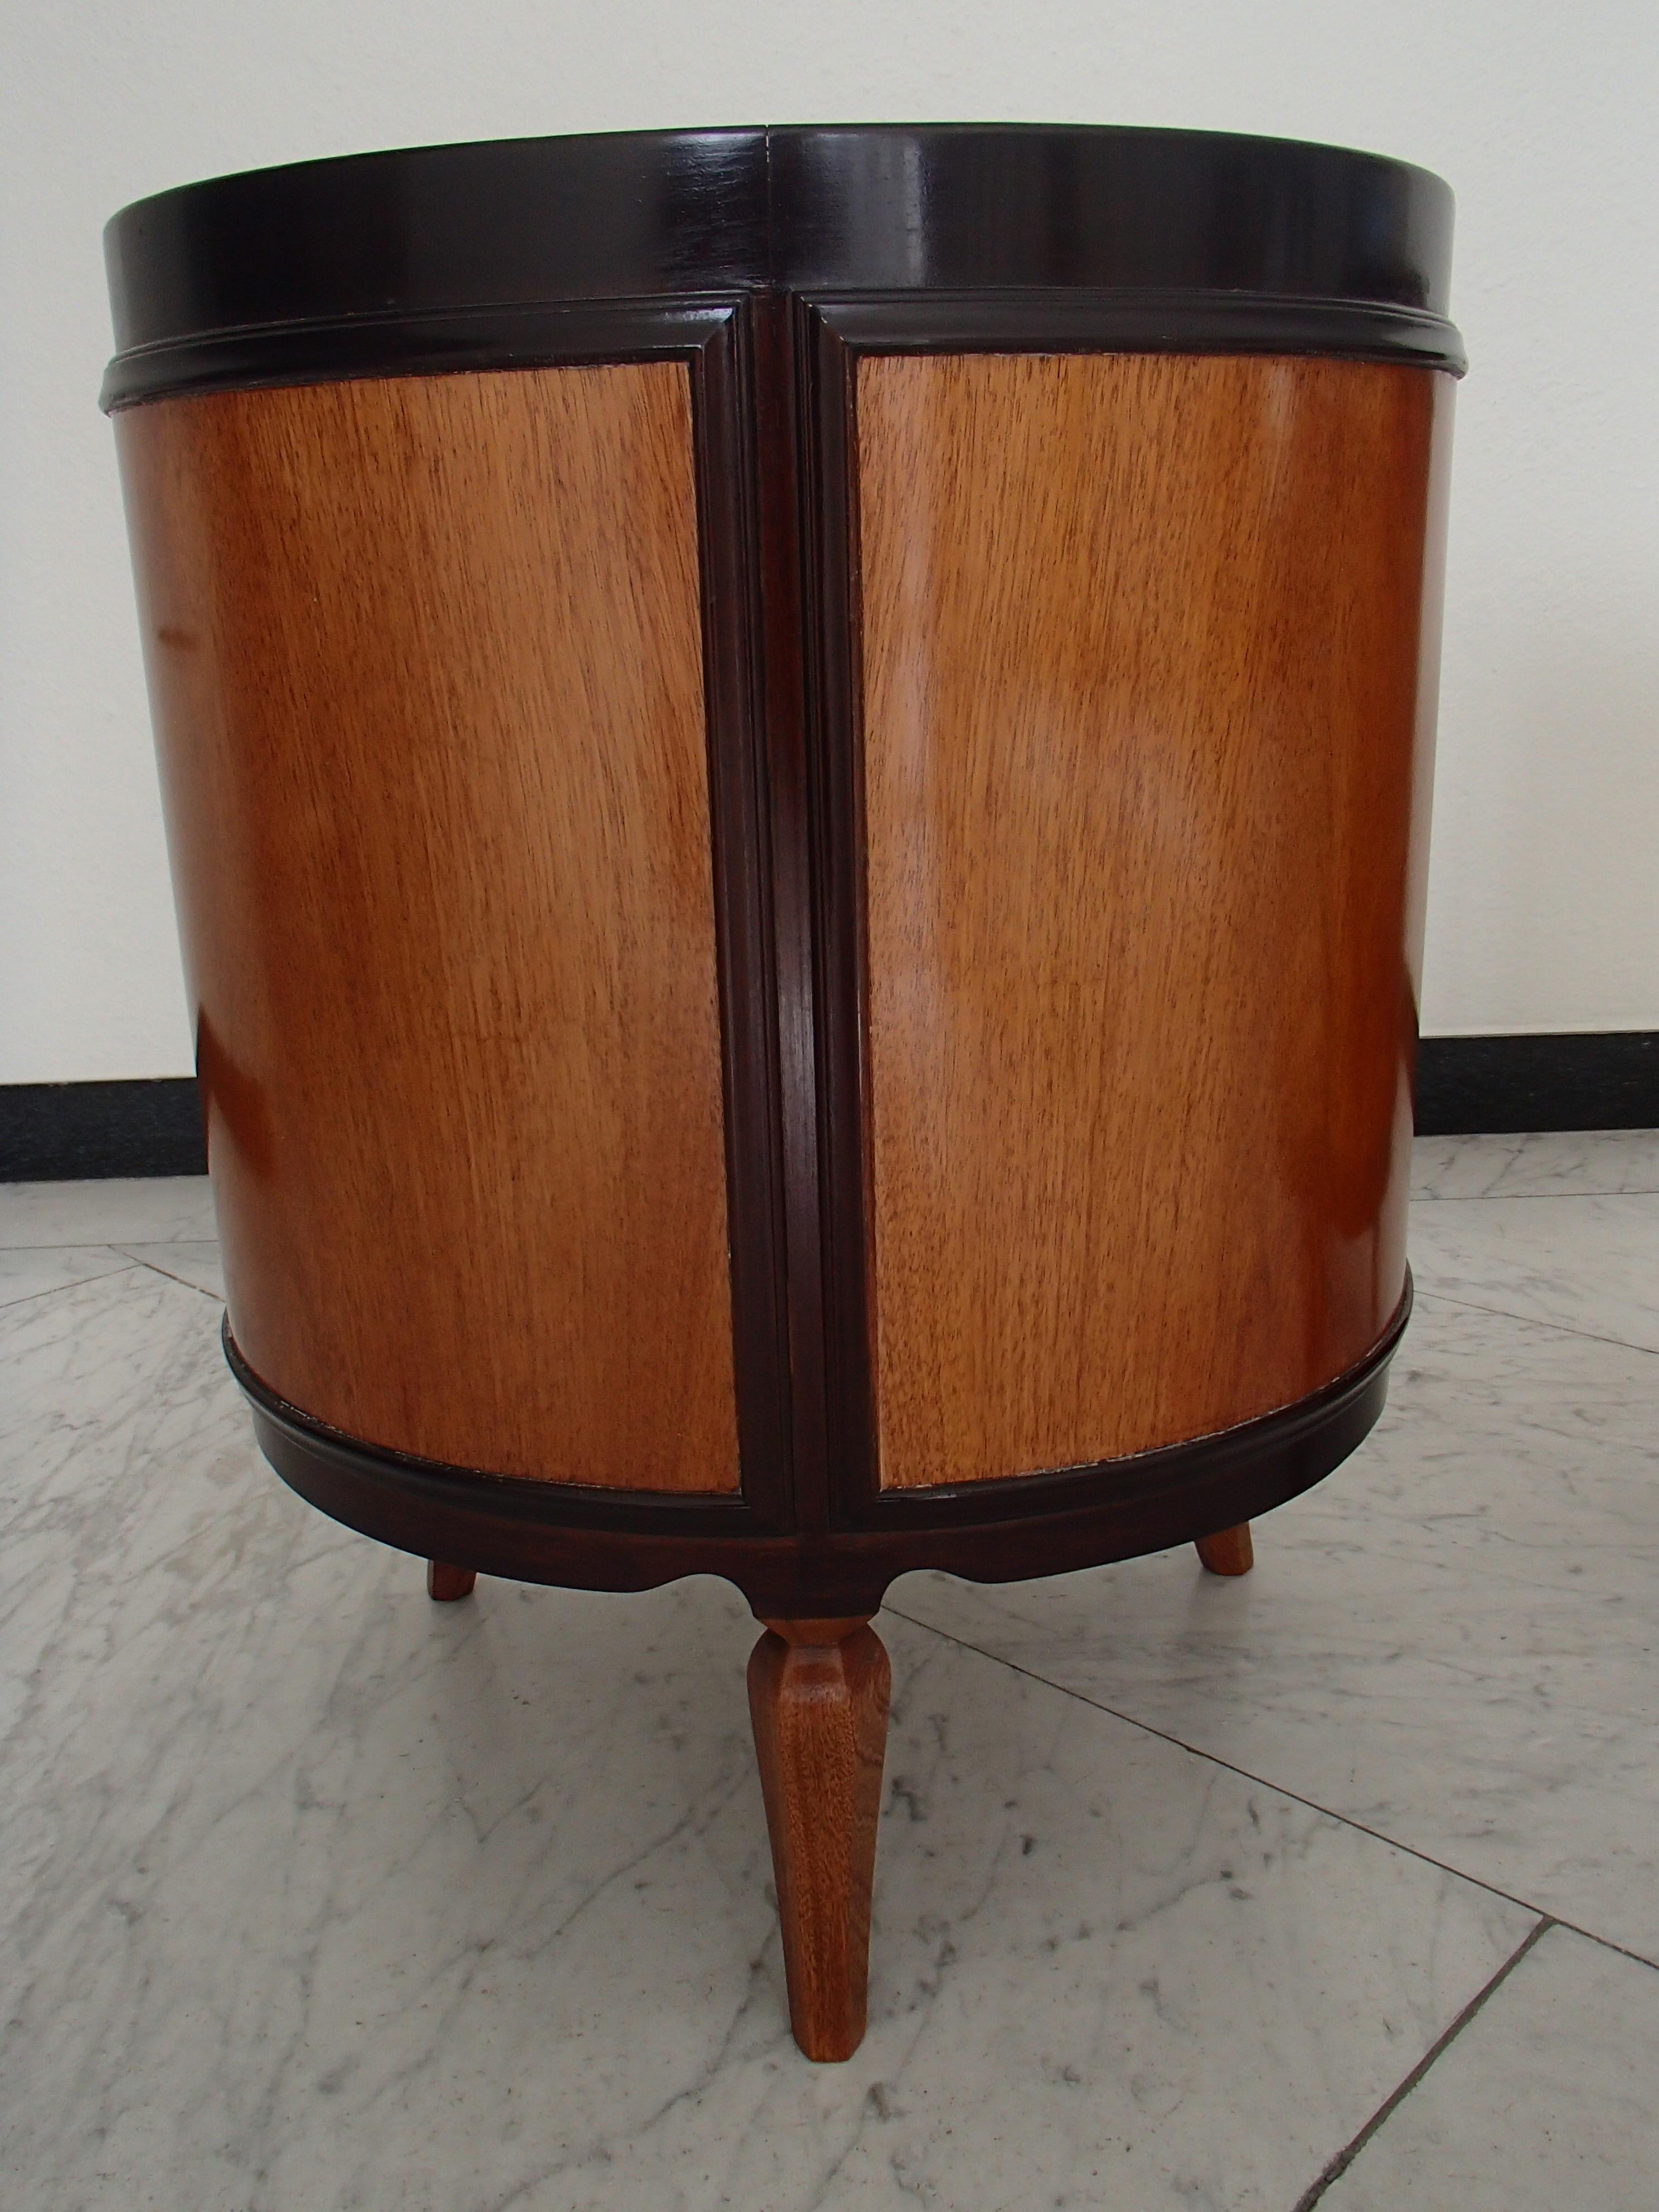 Art Nouveau 1920 This Pair Round of Full Mahogany Side Tables Nightstands with Brass Knobs